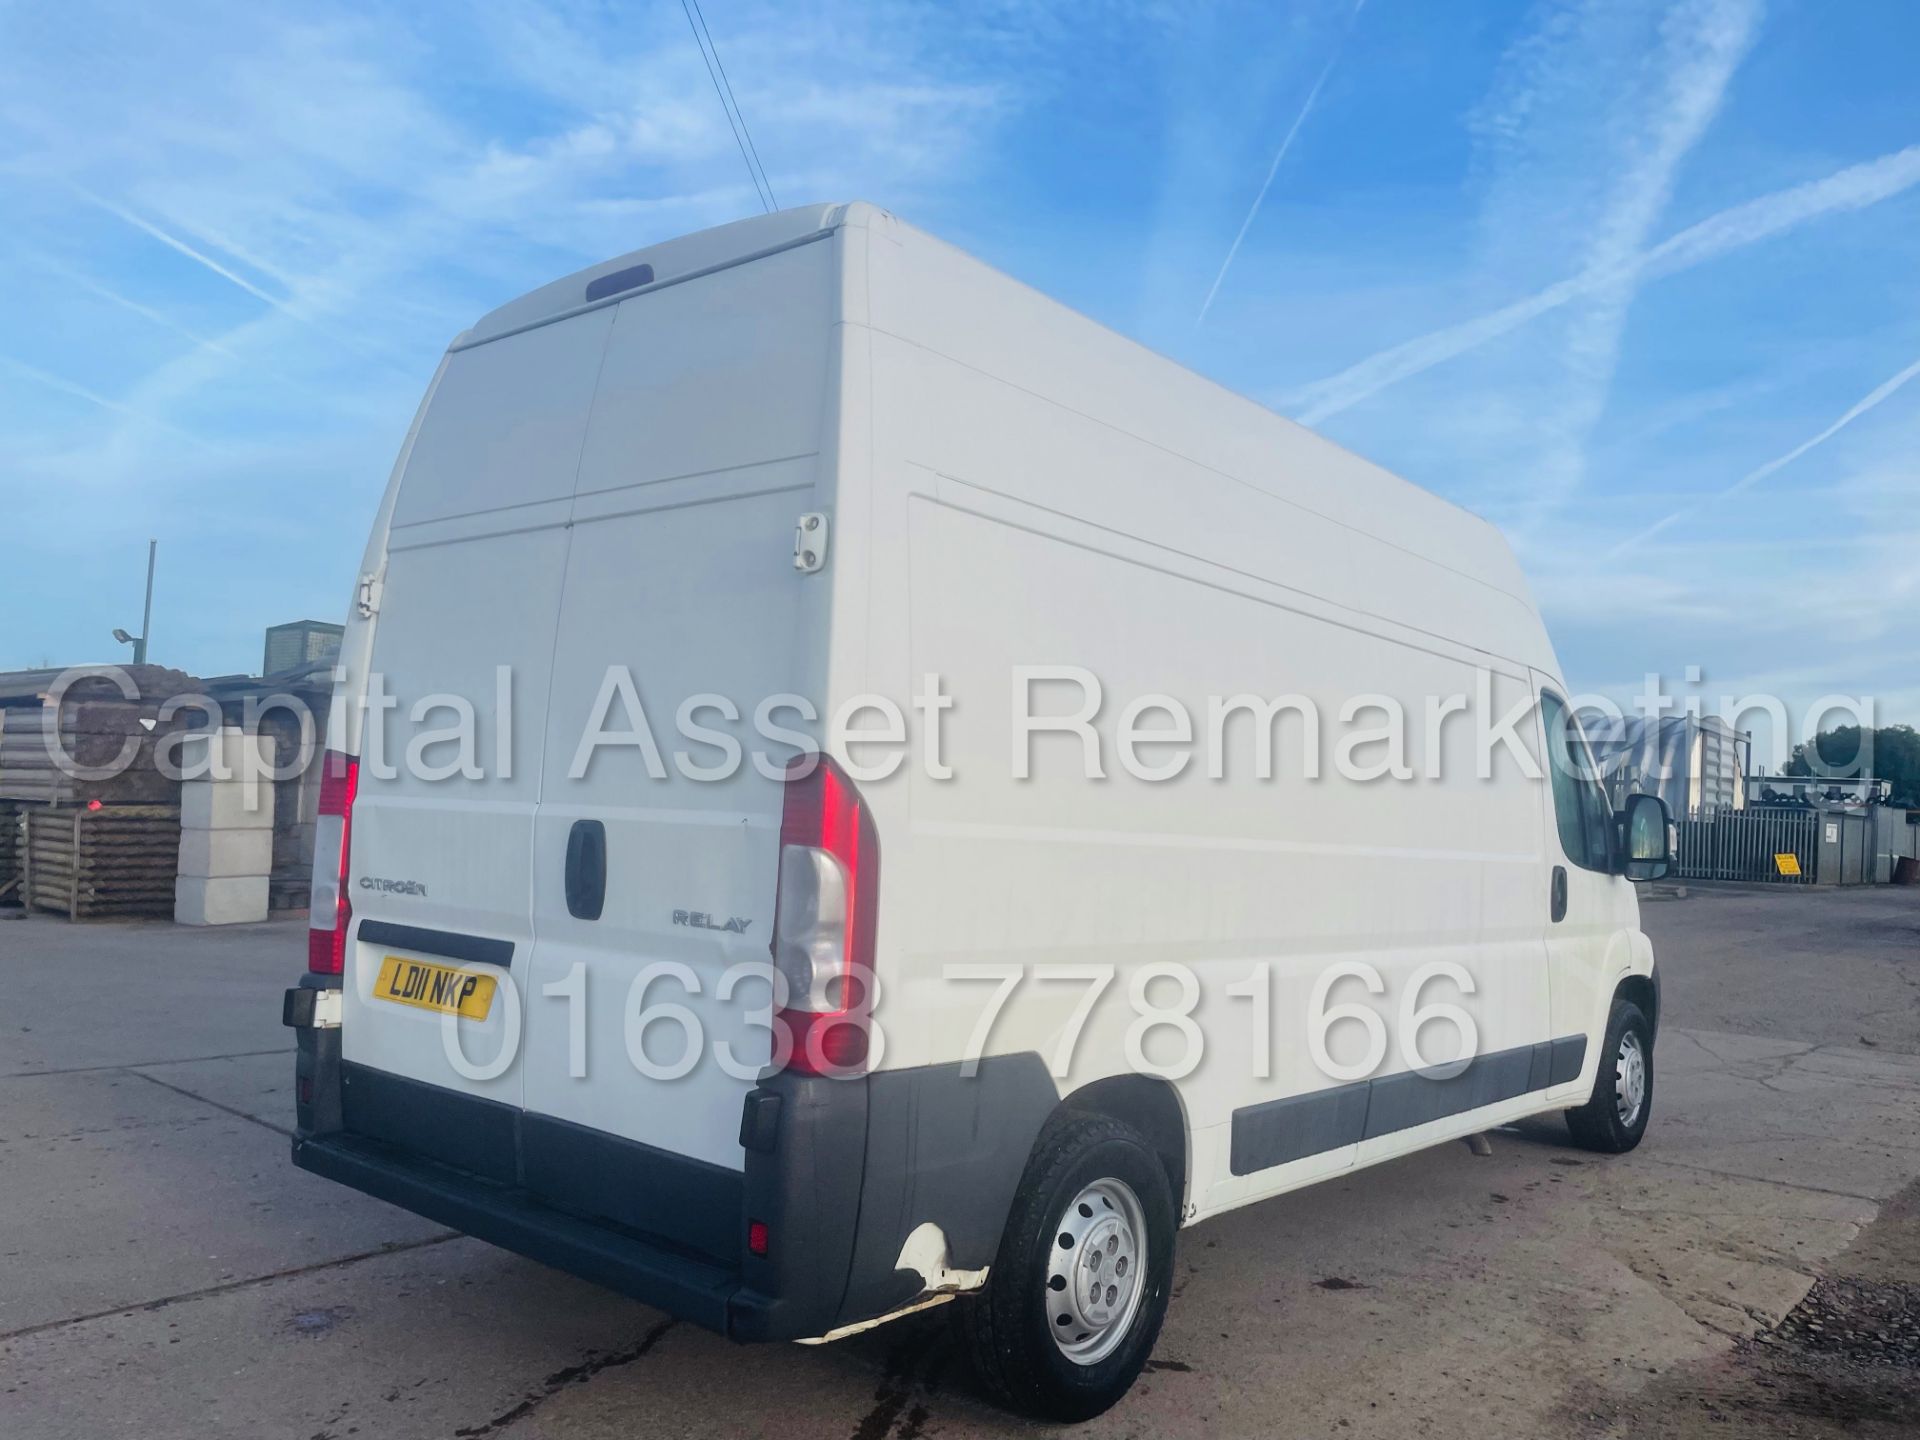 (On Sale) CITROEN RELAY 35 *LWB - EXTRA HI-ROOF* (2011) '2.2 HDI - 120 BHP - 6 SPEED' (3500 KG) - Image 12 of 32